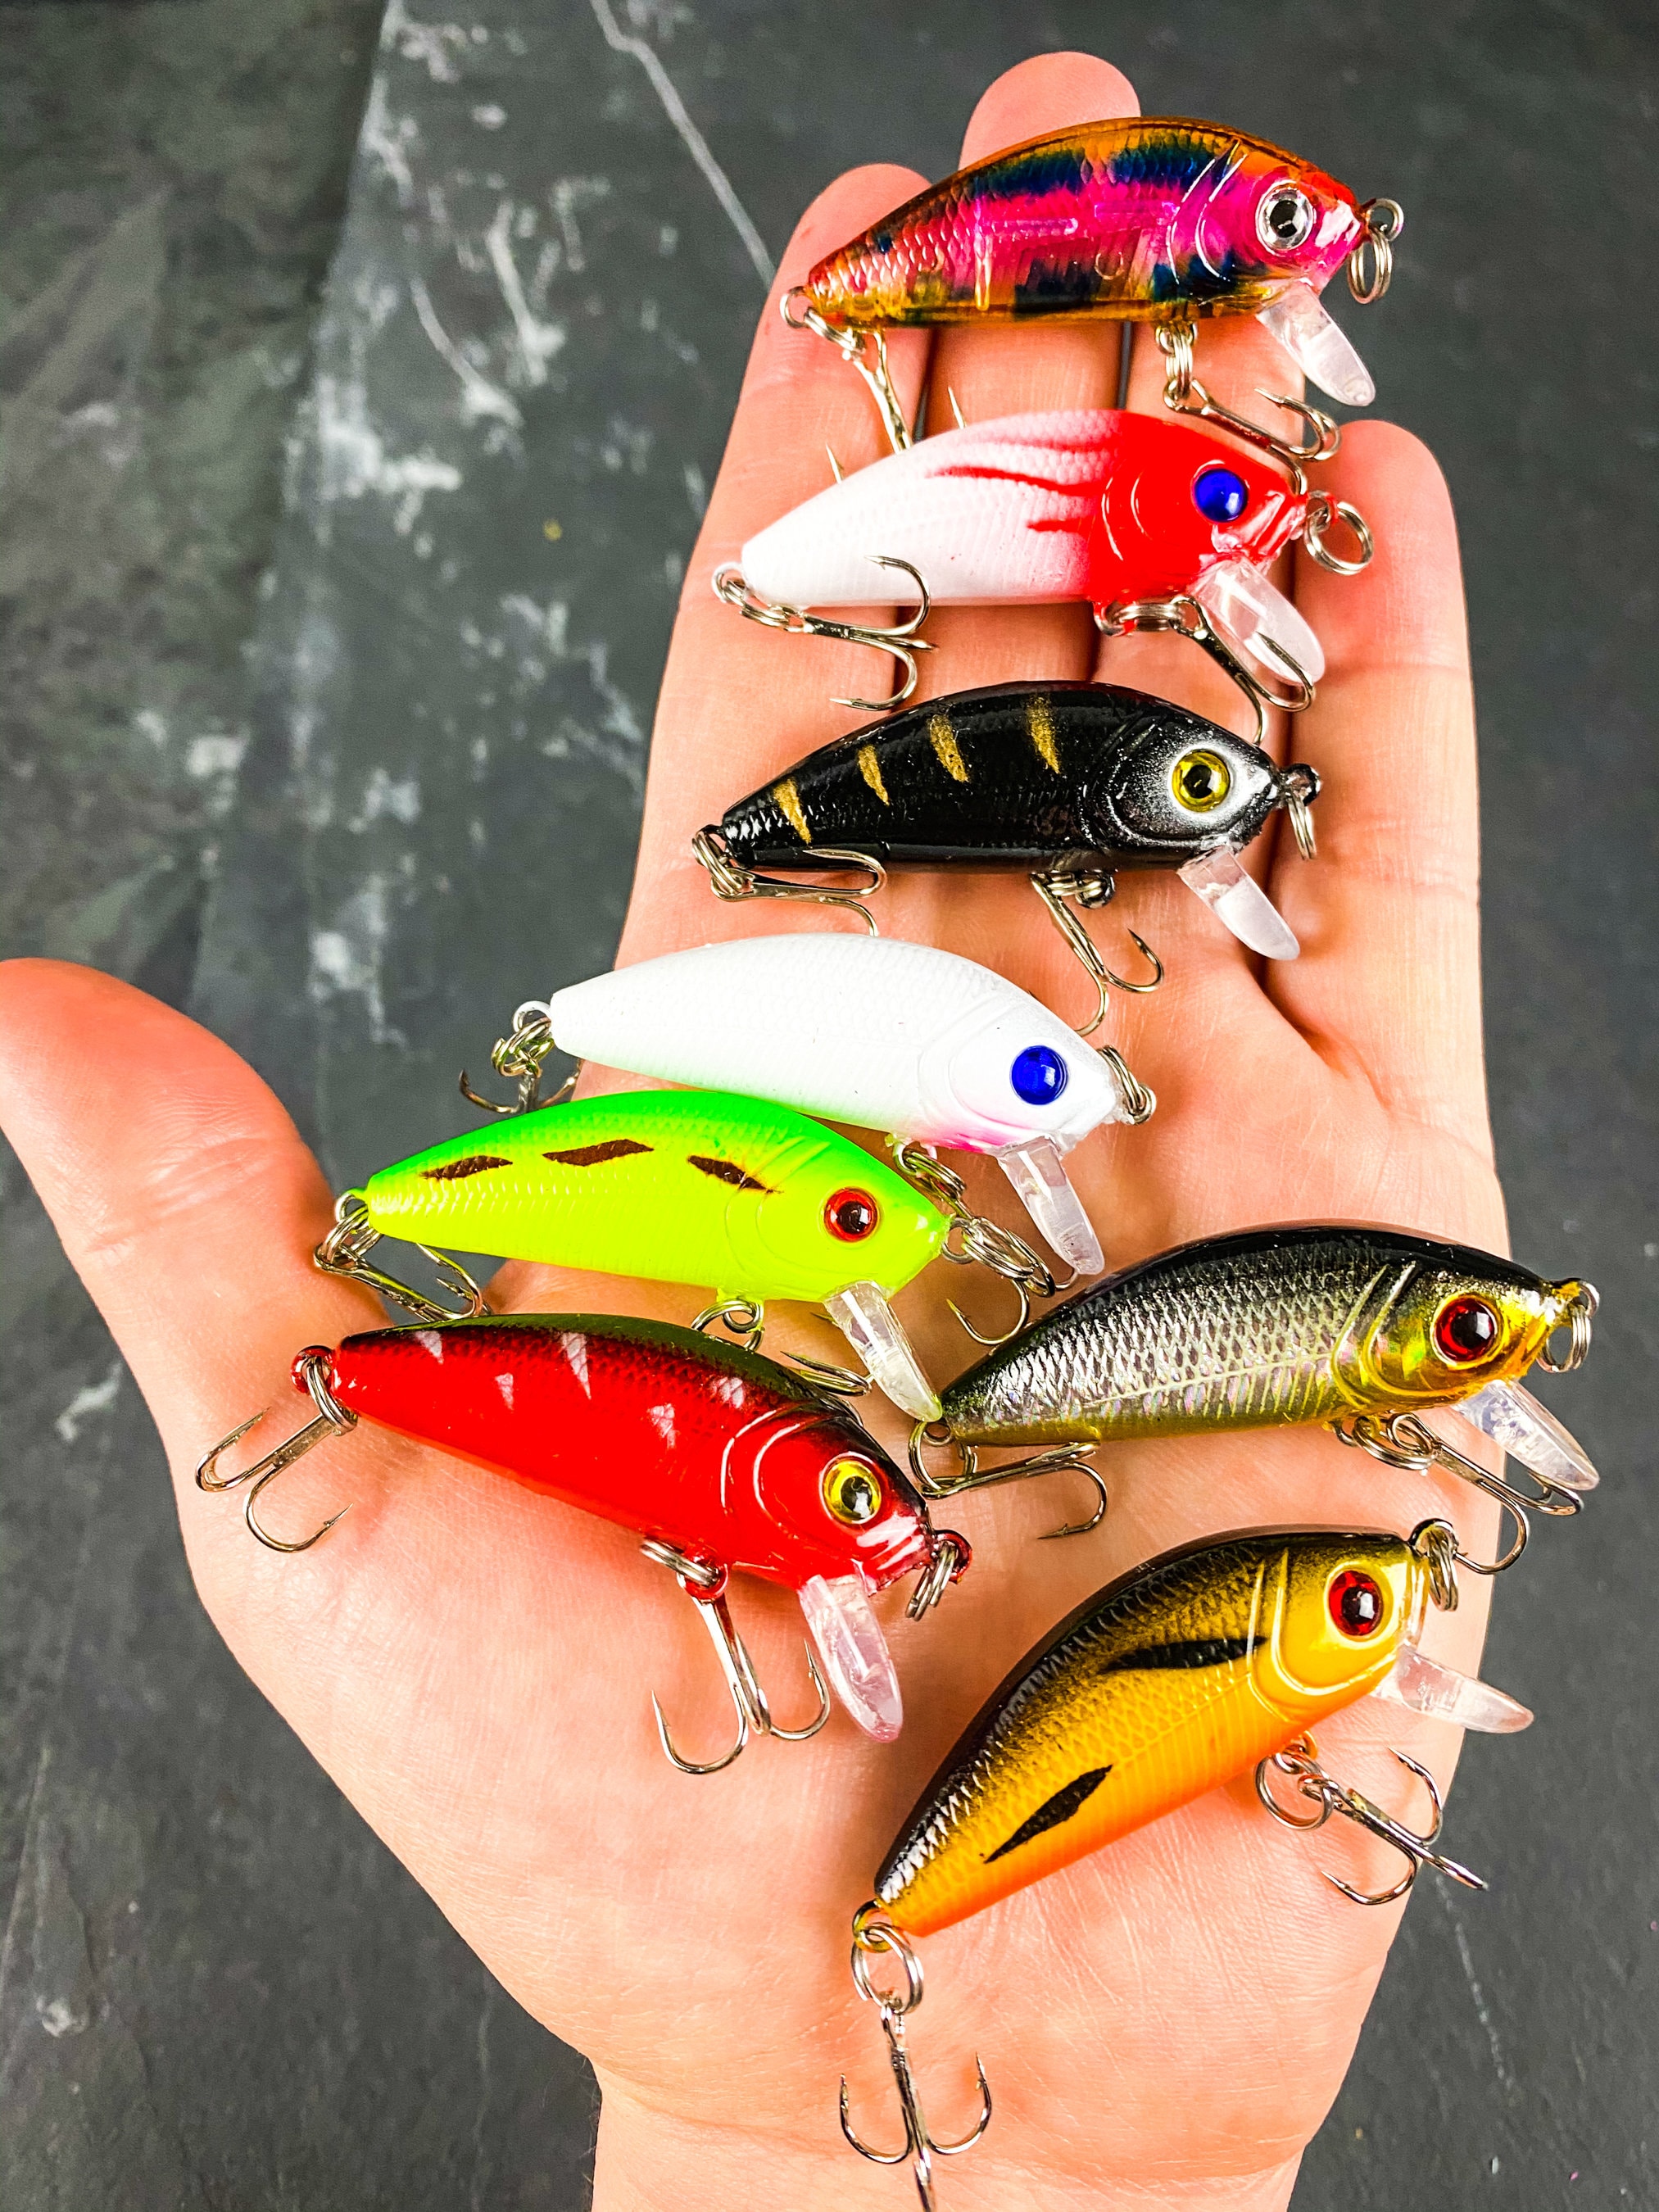 Skinny Hard Crankbait Sinking Minnow Set 14 Fishing Lures Bass, Trout,  Striper, Walleye Freshwater Gifts for Him Gifts for Dad -  Canada